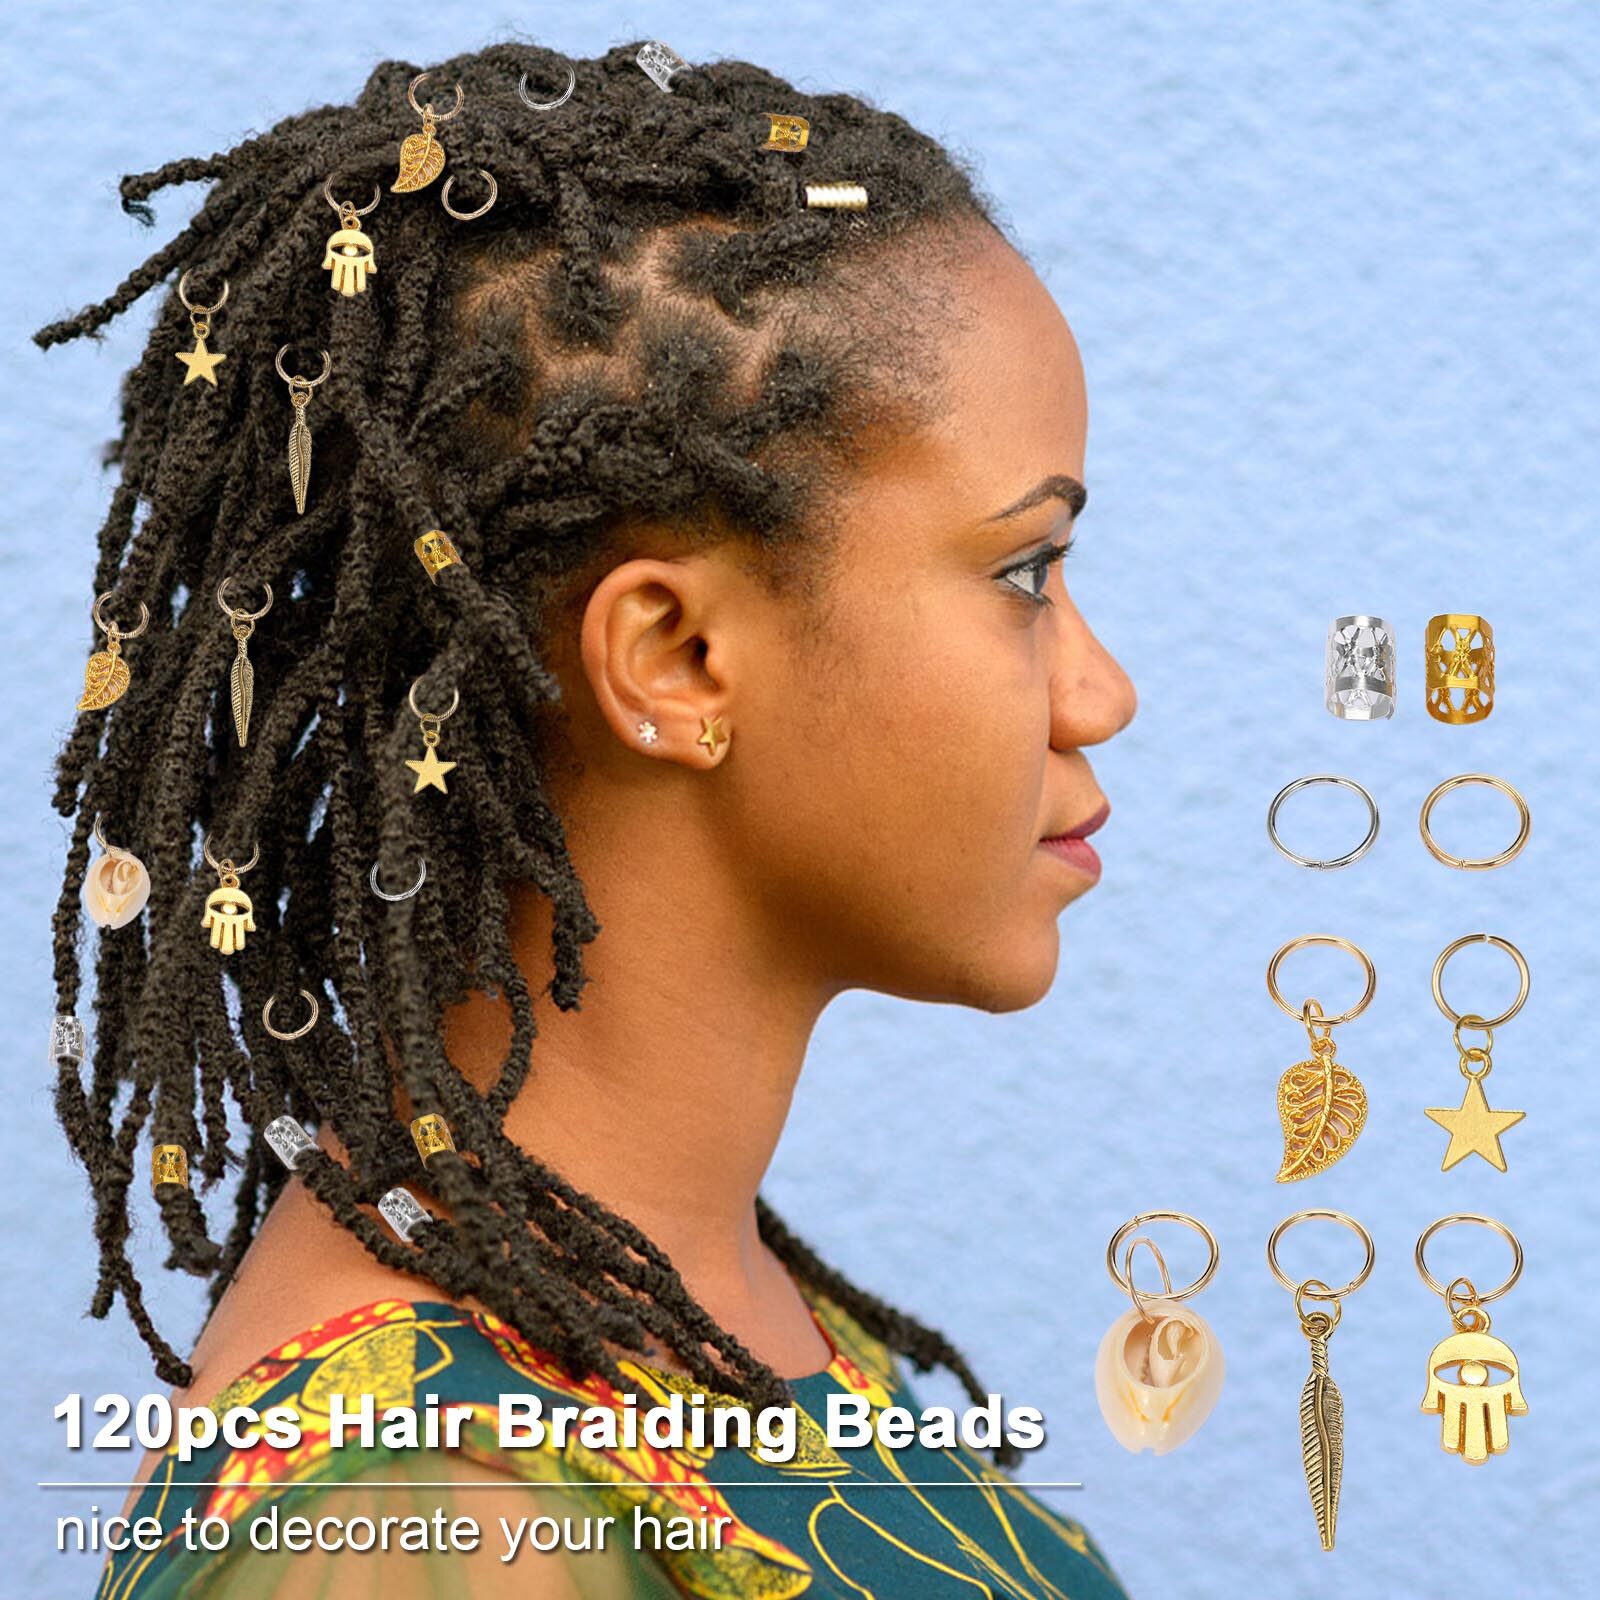 18 Different Types of Hair Accessories